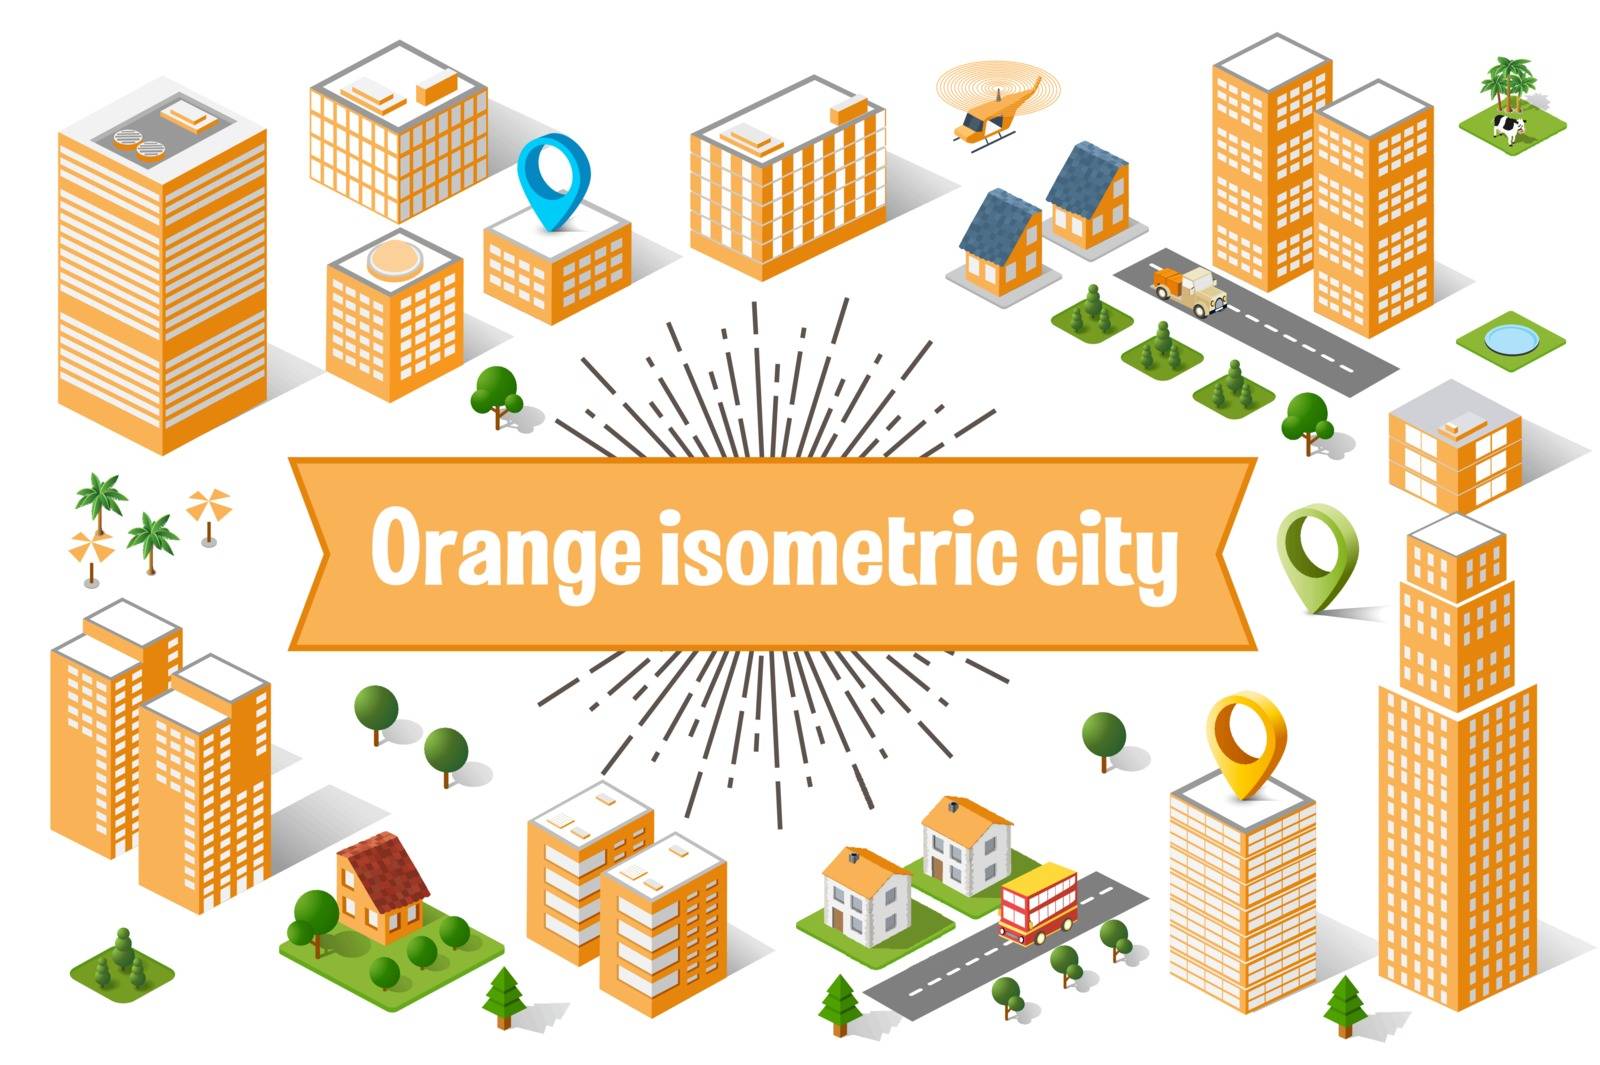 A large orange city of isometric urban objects. A set of urban buildings, skyscrapers, houses, supermarkets, roads and streets.